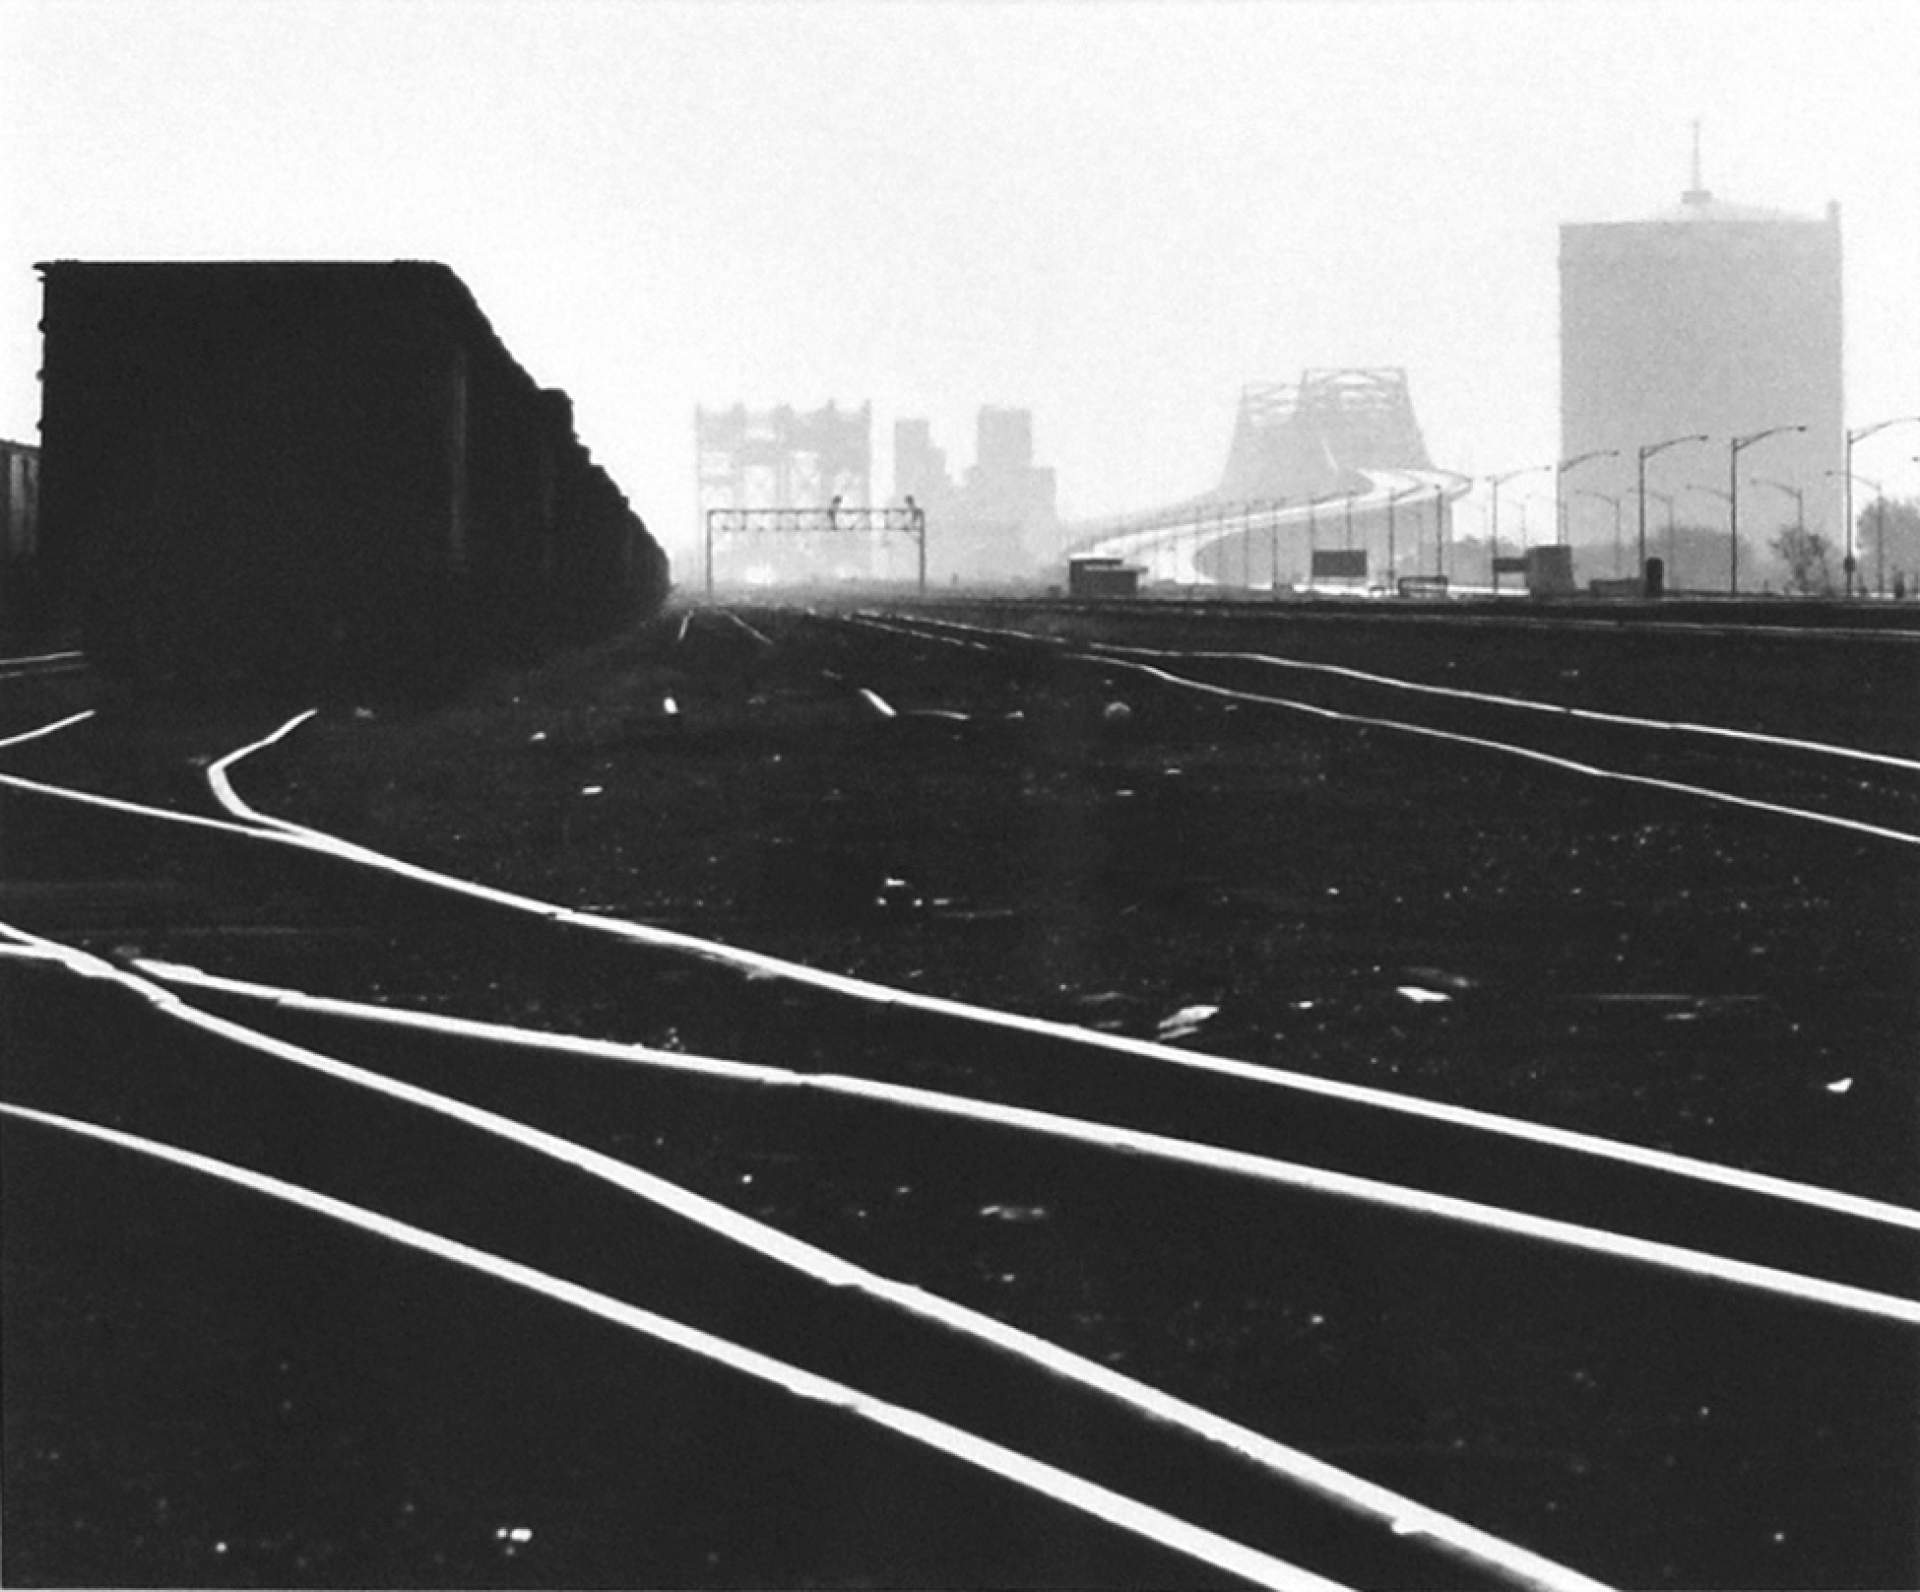 Railroad Yards, South Chicago, Illinois